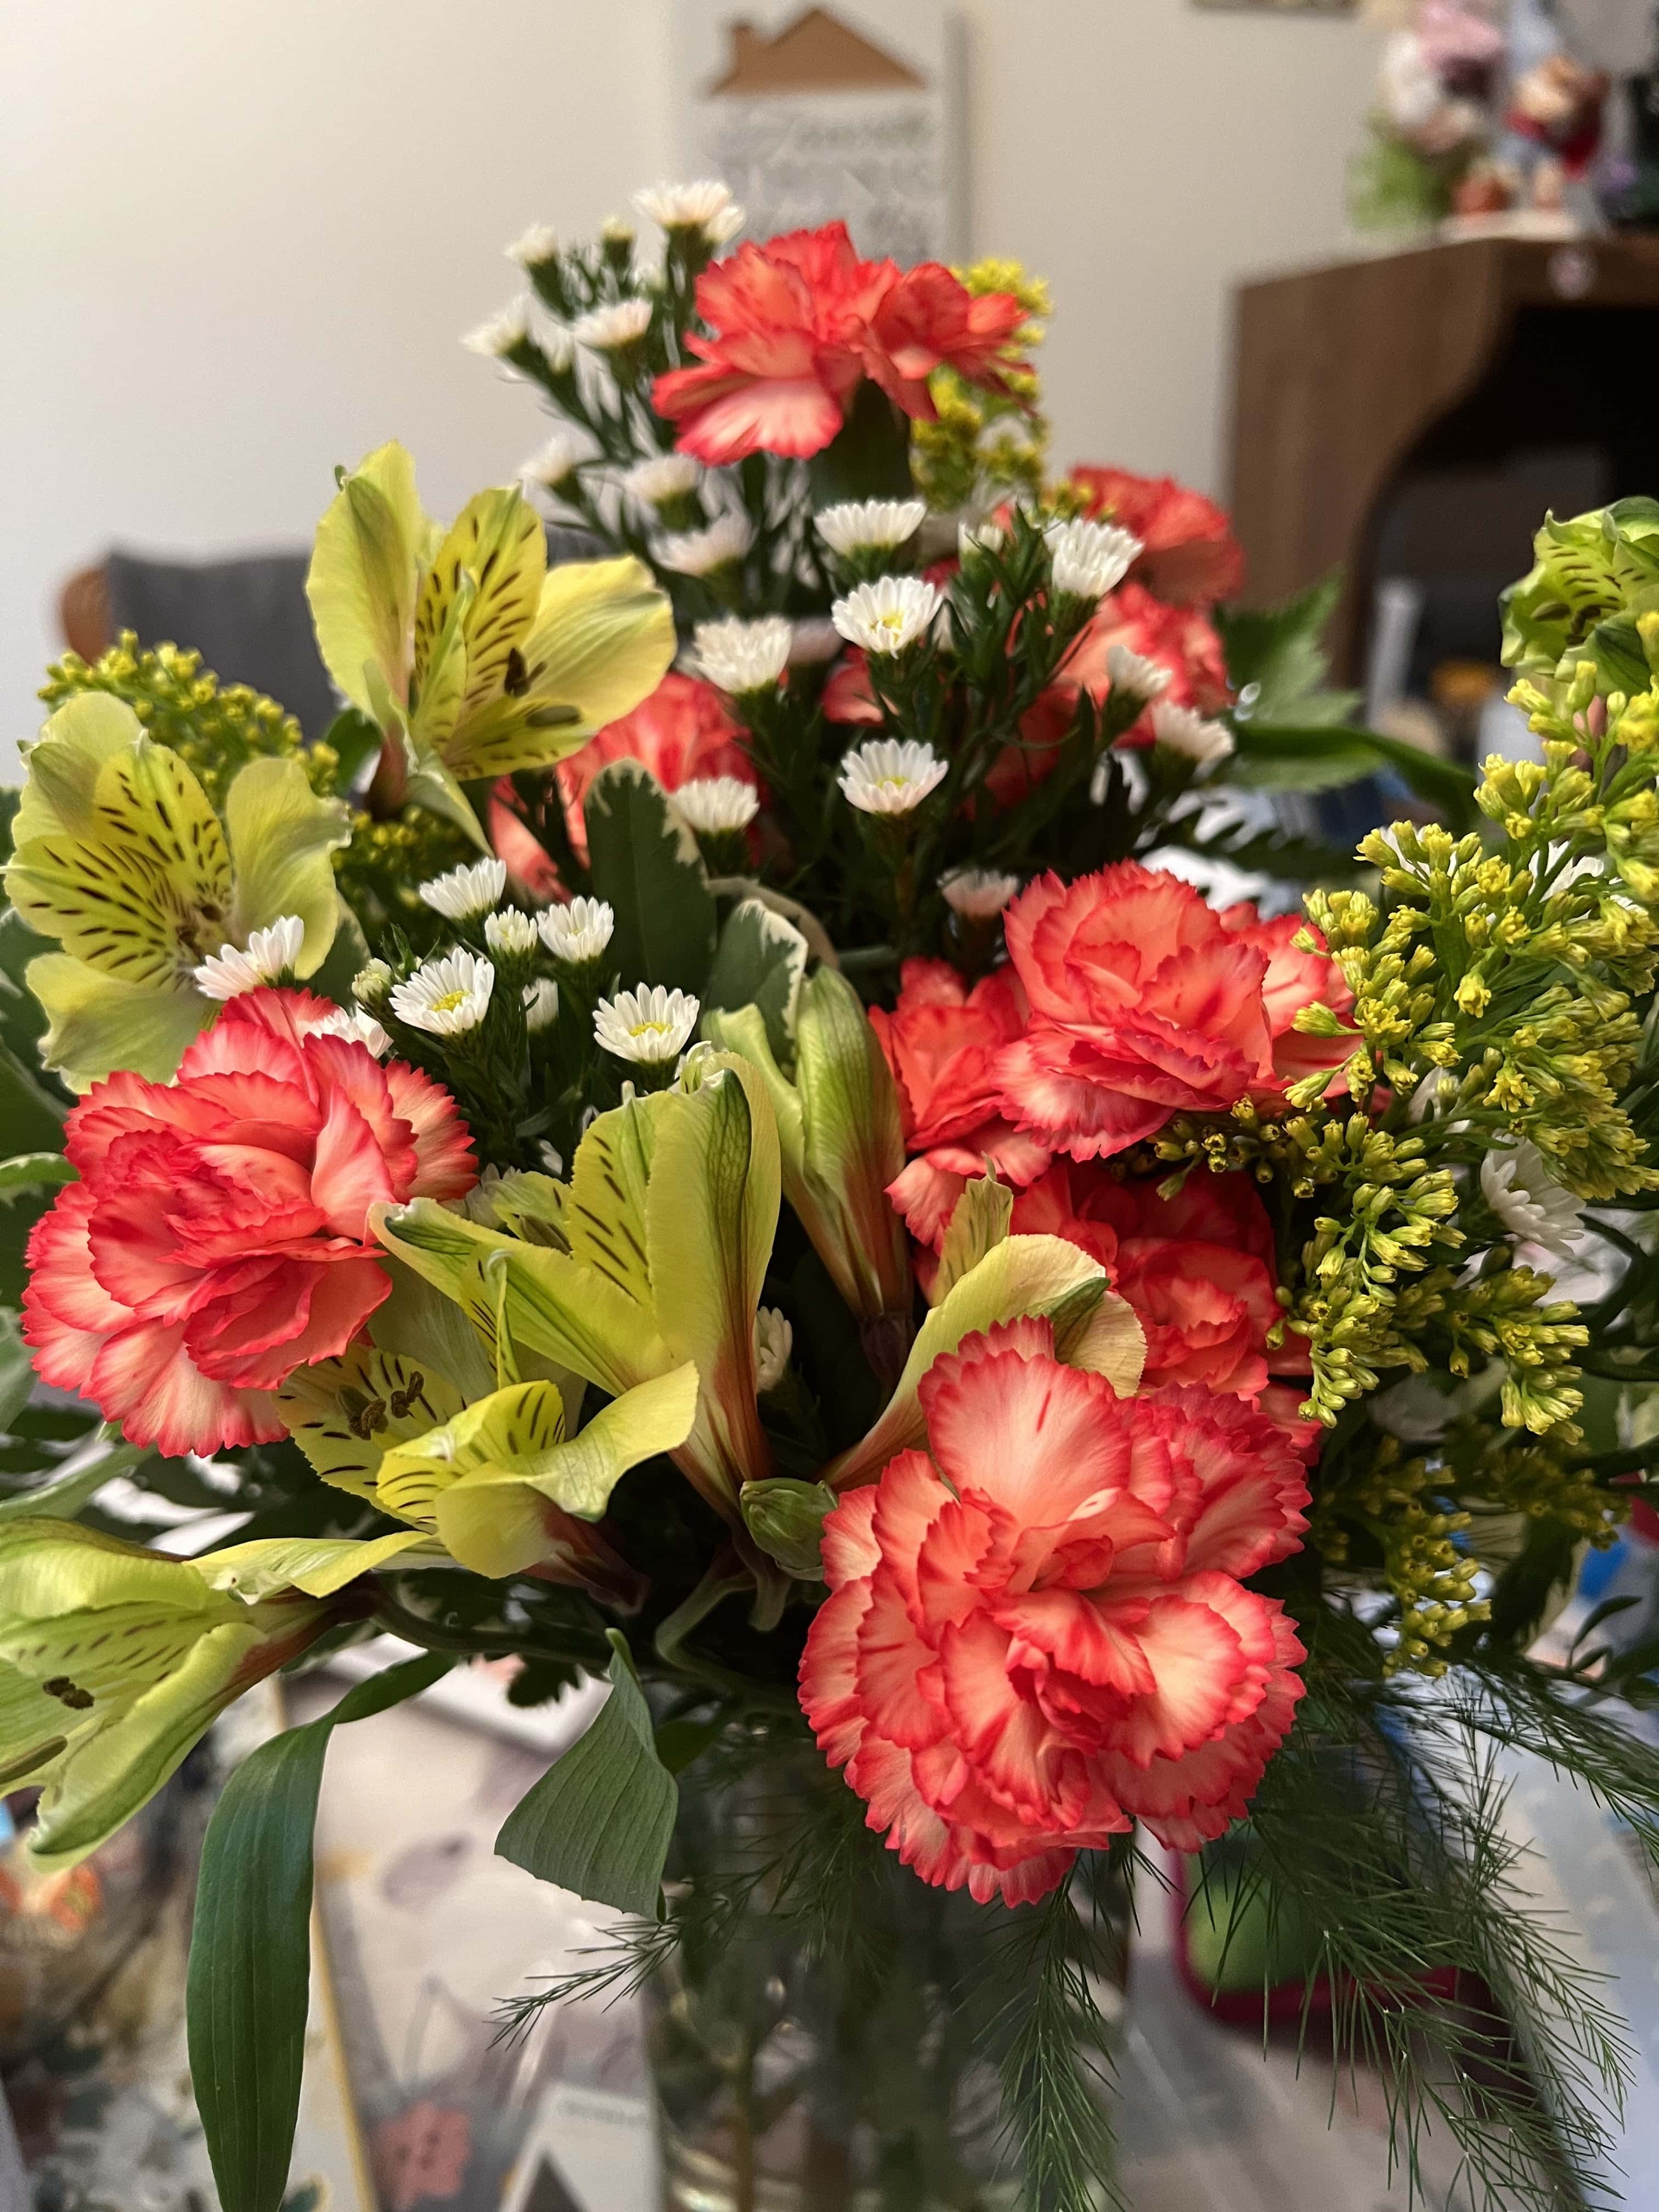 Red Rose Florist and Gift Shop - Rochester, NY, US, floral arrangements near me